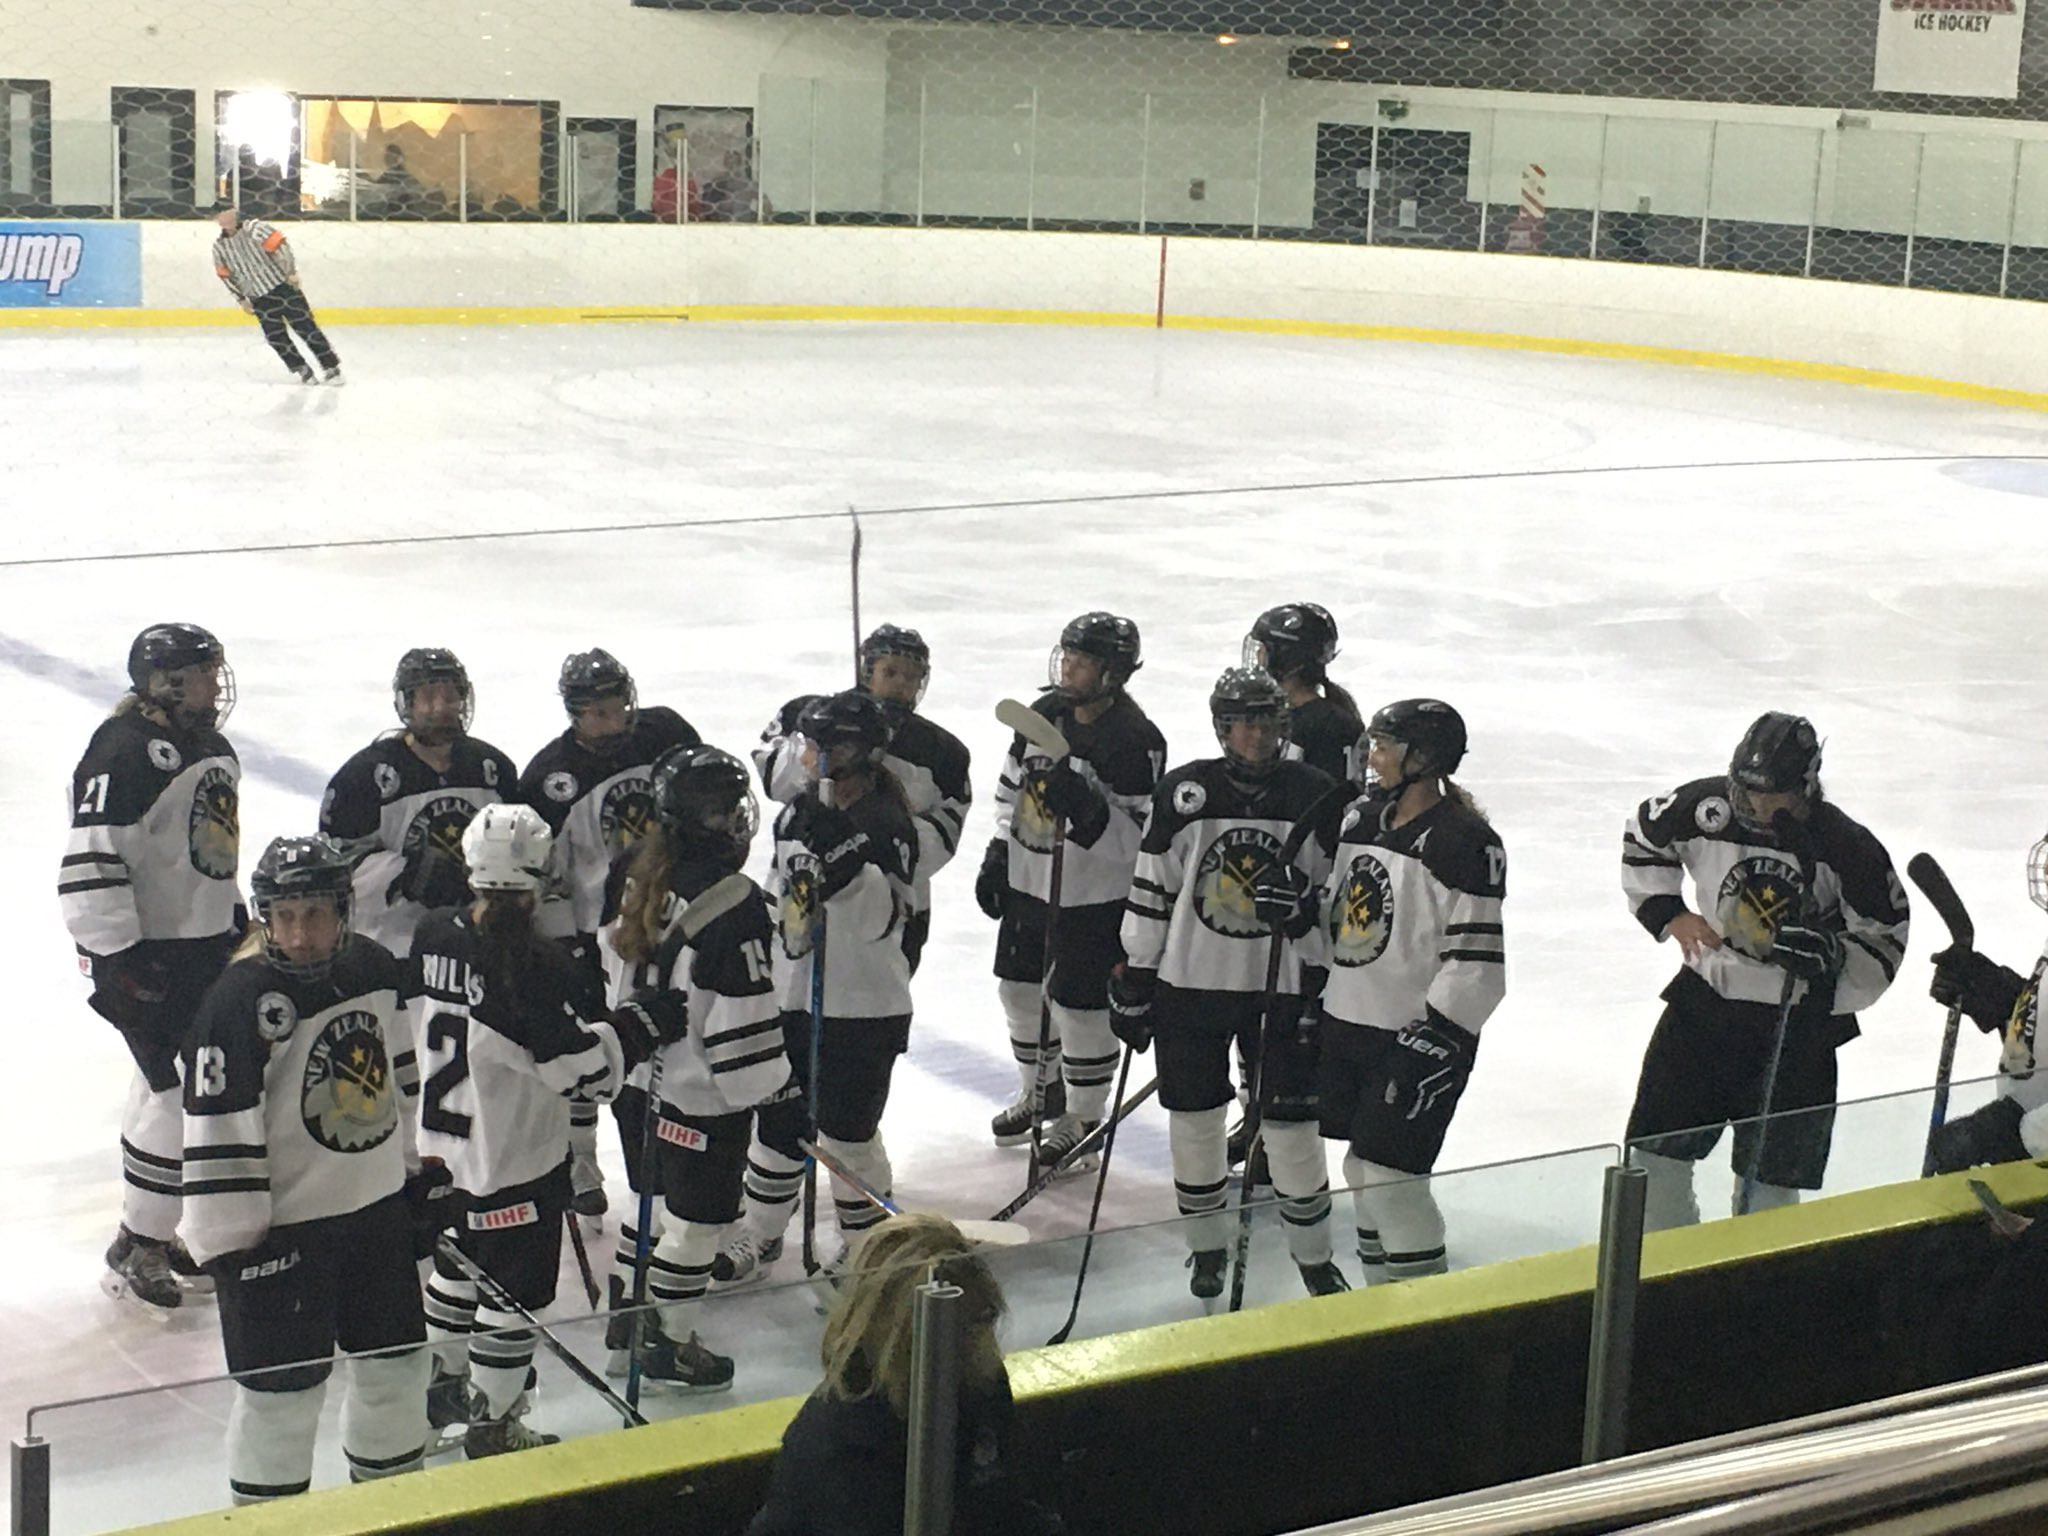 New Zealand's women's ice hockey team has withdrawn from the World Championship ©Twitter/@Colin_A_Surfer